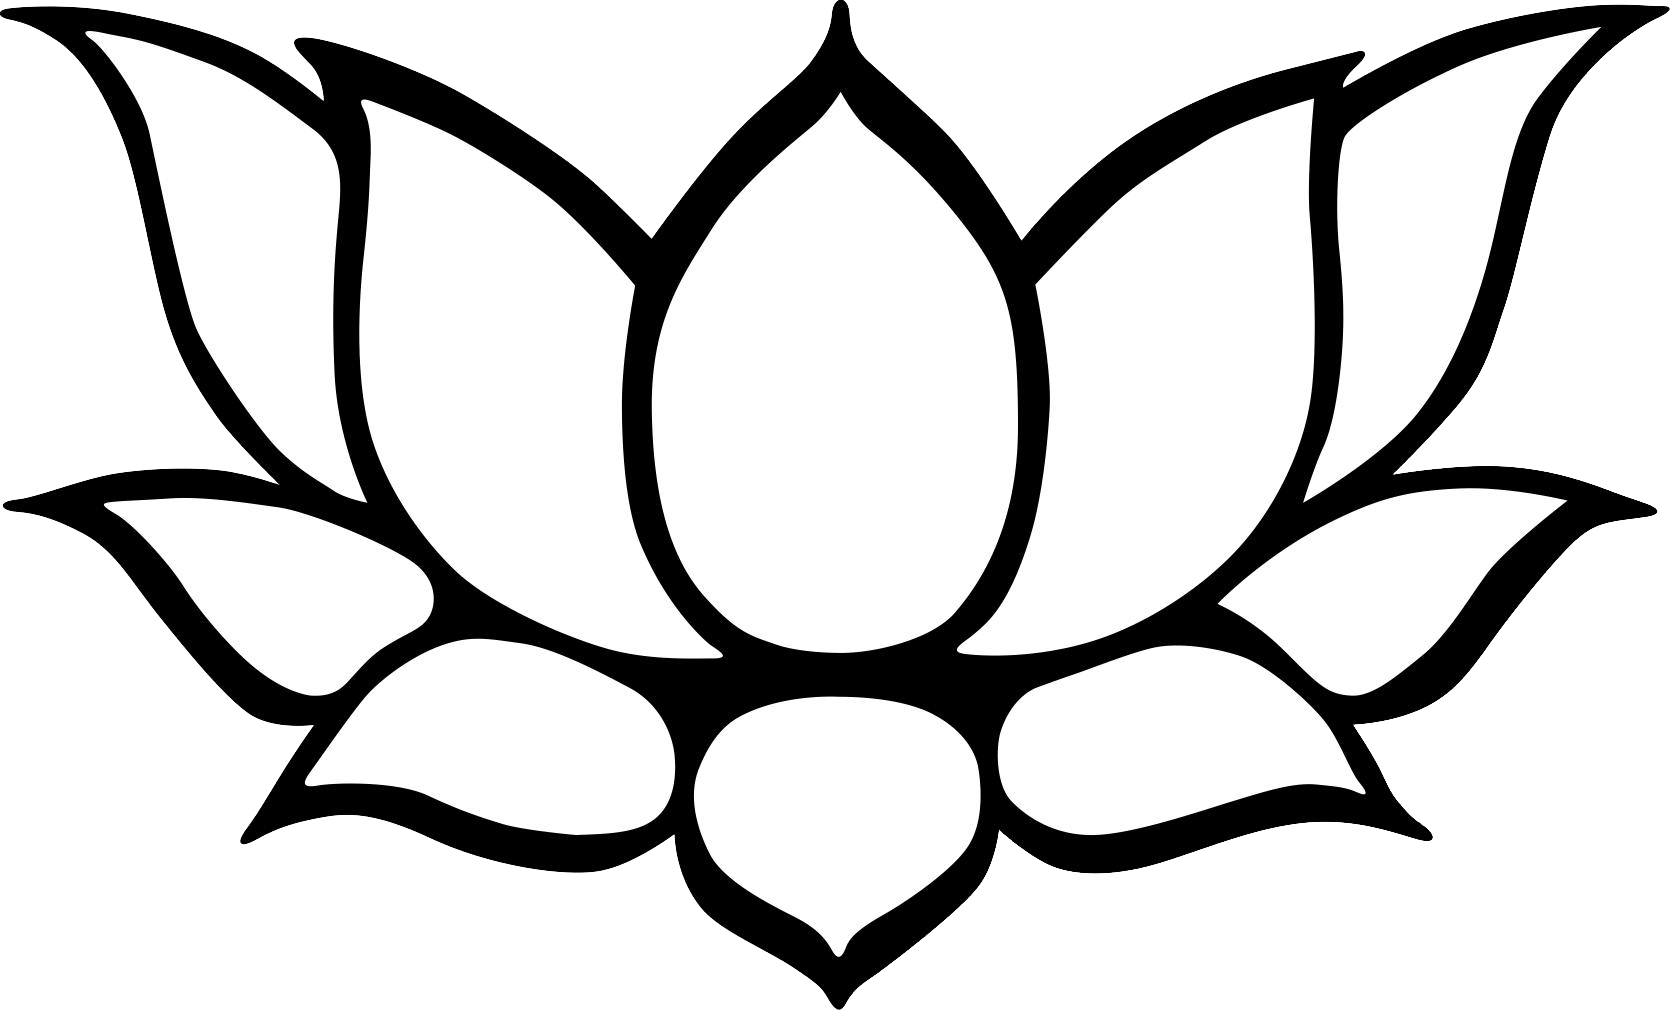 1000+ images about Lotus Flower